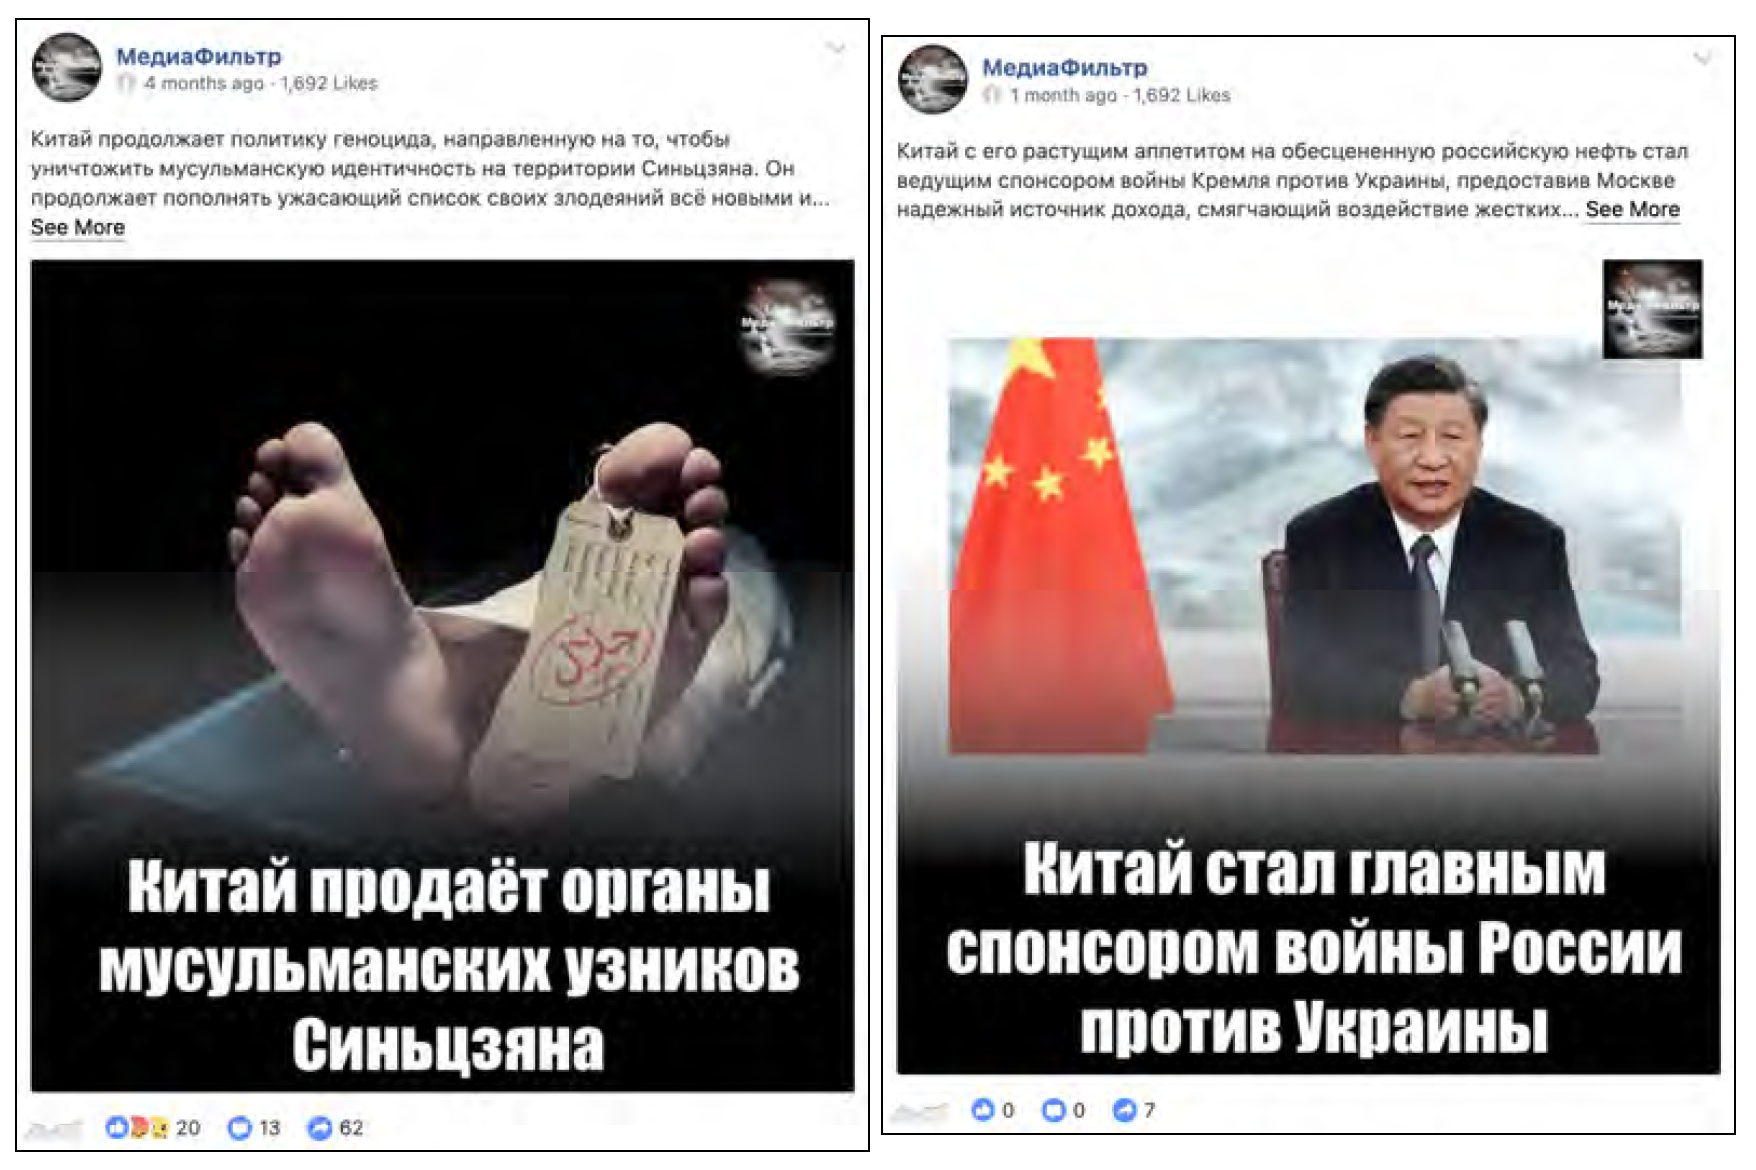 Posts about alleged organ harvesting of Muslims in Xinjiang, left, and China being blamed for being the main sponsor of Russia’s war against Ukraine, right. (Stanford Internet Observatory-Graphika)